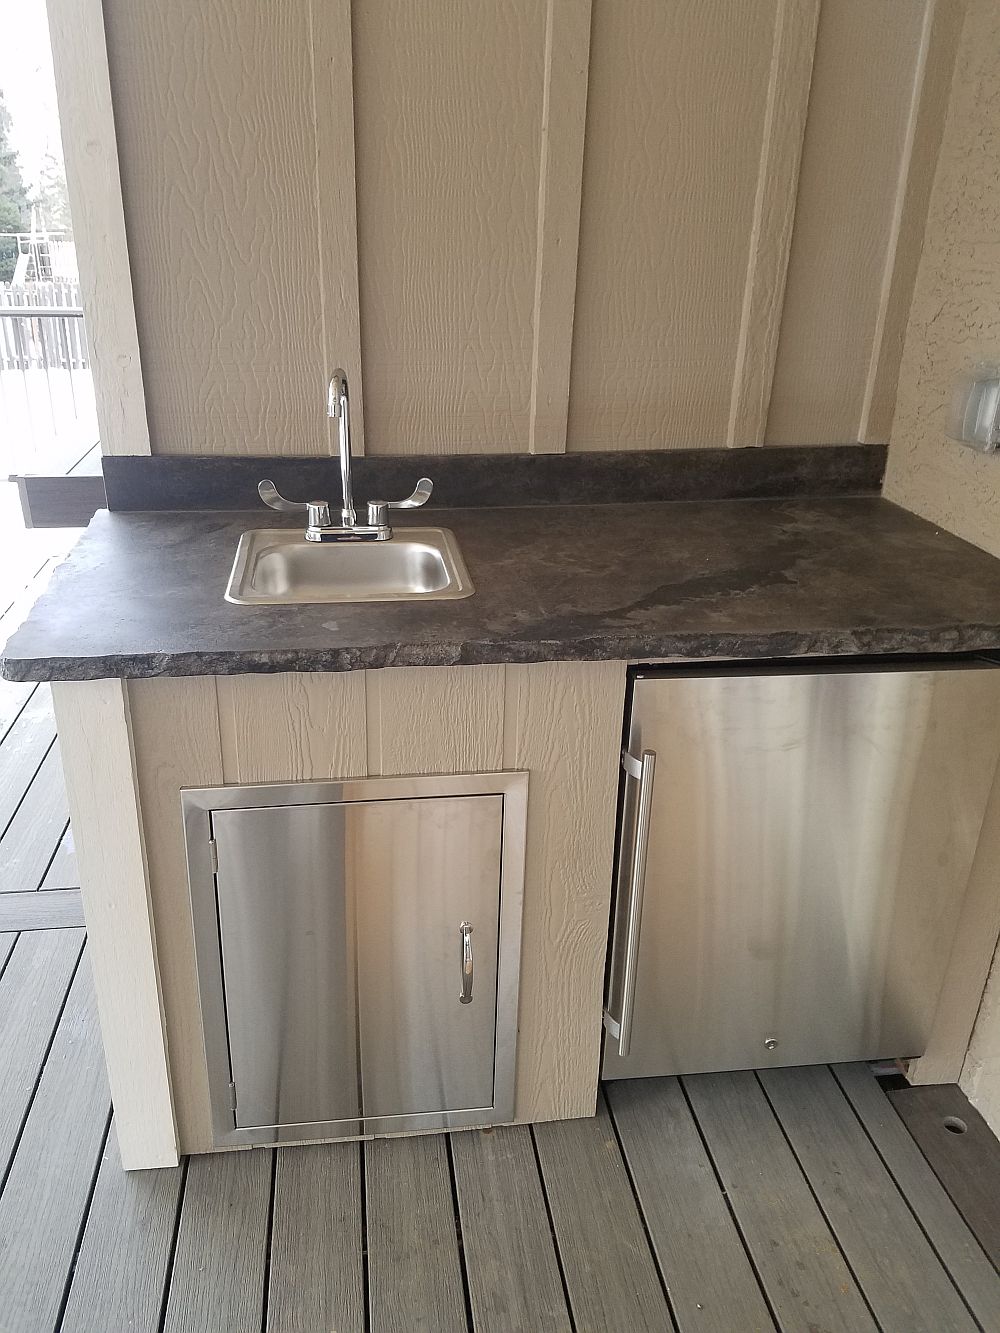 Composite deck with a fully-functioning sink and mini refrigerator.